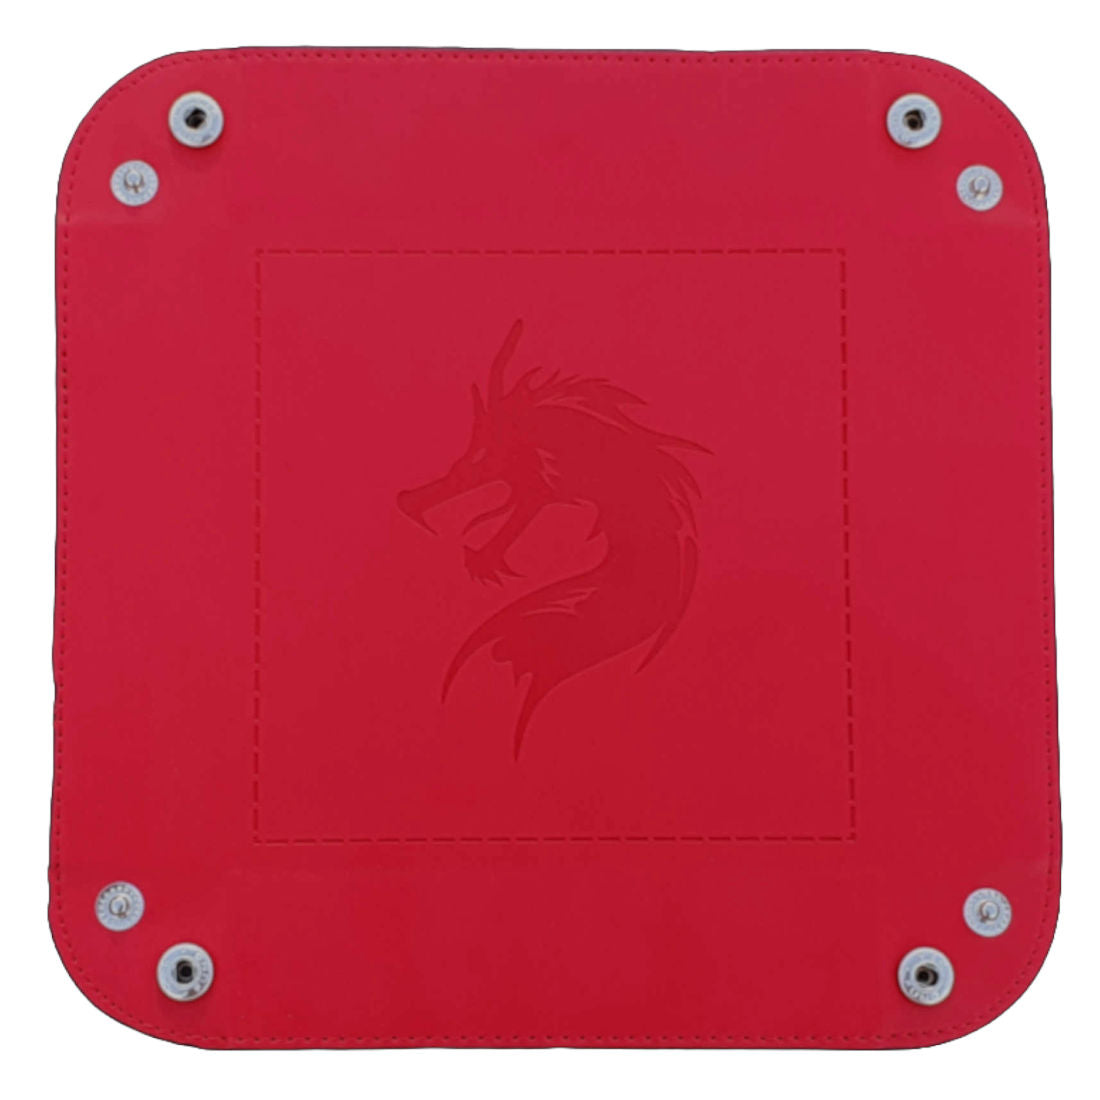 Dragon Dice Tray Folding Square red